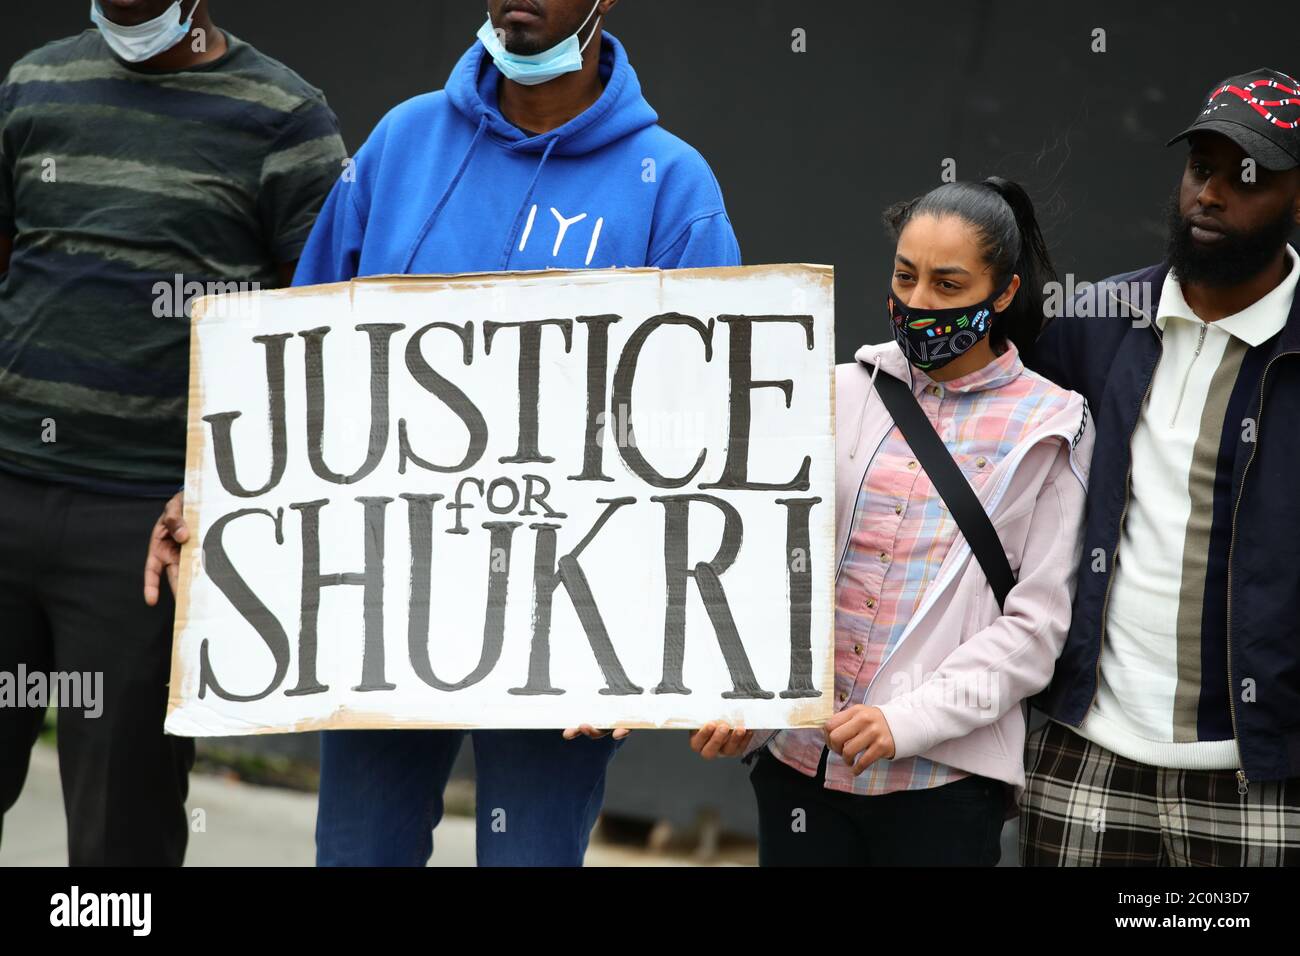 Members of the Justice for Shukri campaign at the unveiling of a Black Lives Matter UK (BLMUK) billboard on Westminster Bridge Road, London, which lists more than 3000 names of people who have died in police custody, prisons, immigration detention centres and in racist attacks in the UK, as well as those who have died as the result of coronavirus. The billboard has been erected by BLMUK, in collaboration with the United Families and Friends Campaign, Justice for Belly, Justice for Shukri, Migrants Organise and the Grenfell Estate. Stock Photo